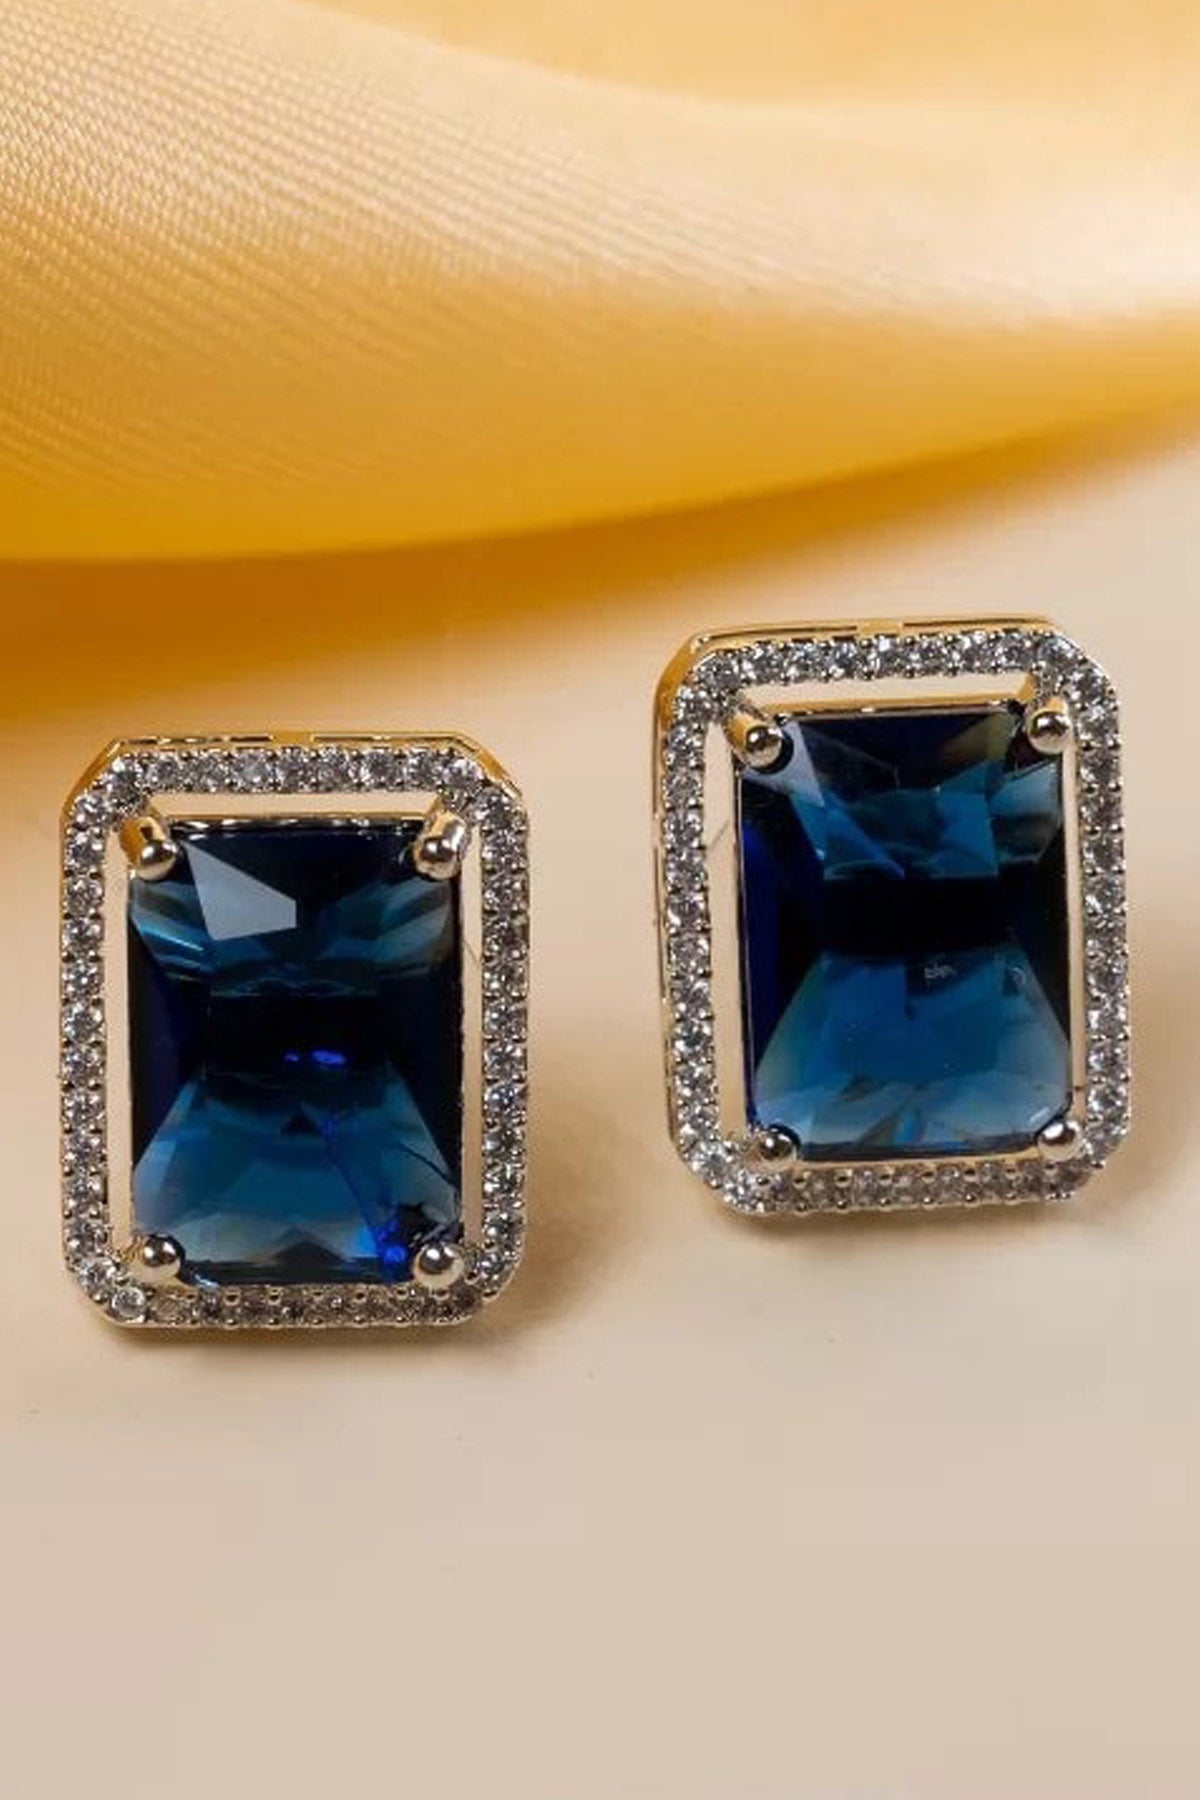 Blue Rectangle Diamond Studs of Brand Putstyle Available online at ScrollnShops